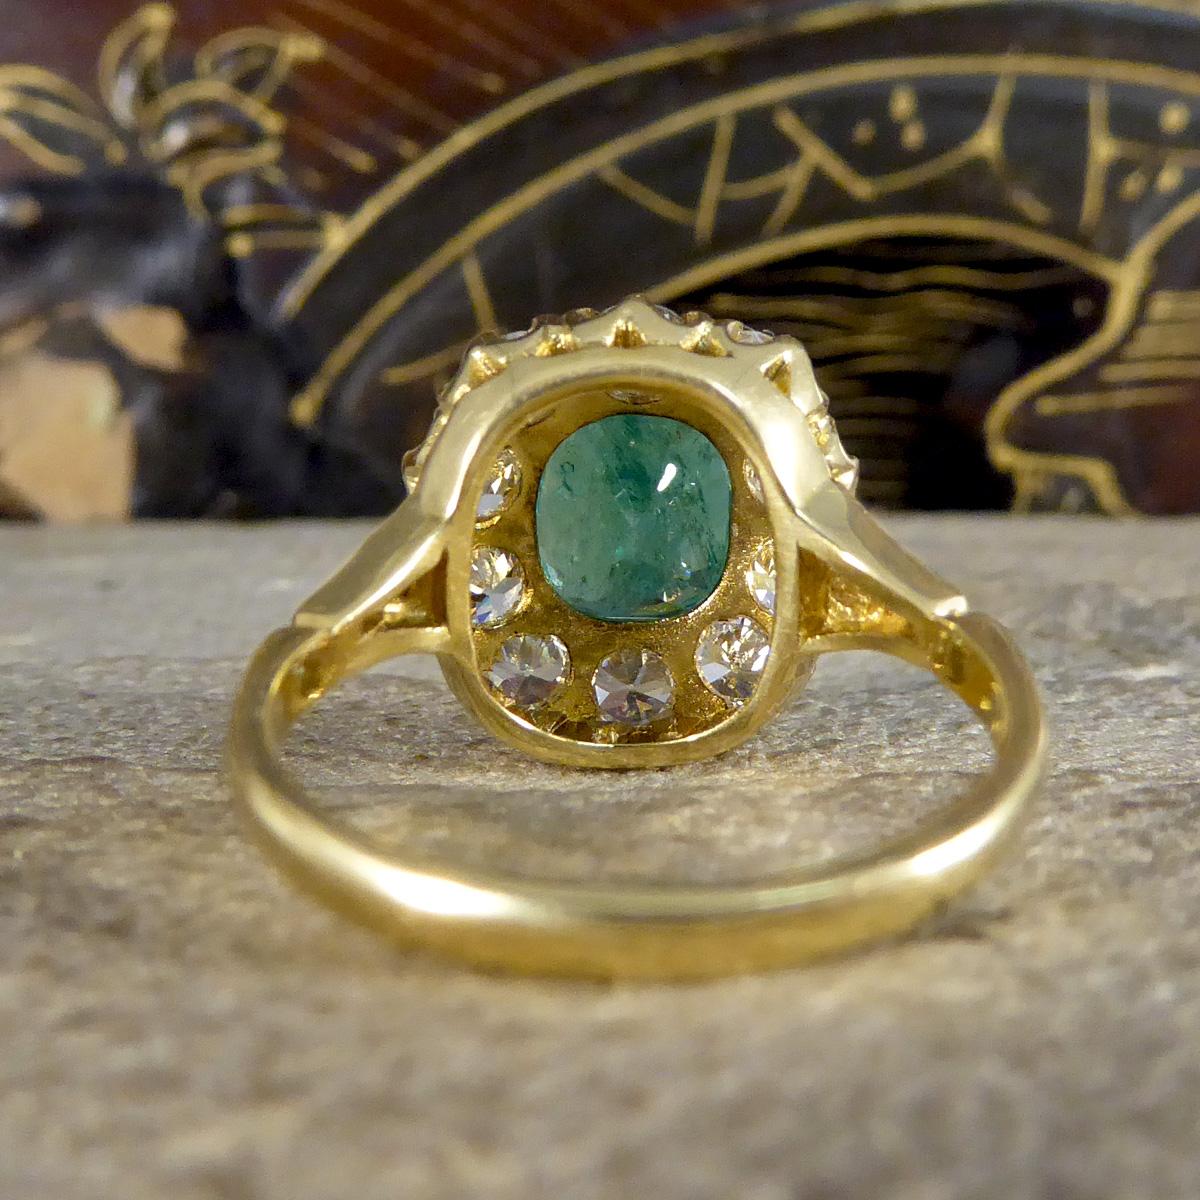 Old European Cut 1.82ct Emerald and 1.20ct Old Cut Diamond Cluster Ring in 18ct Yellow Gold